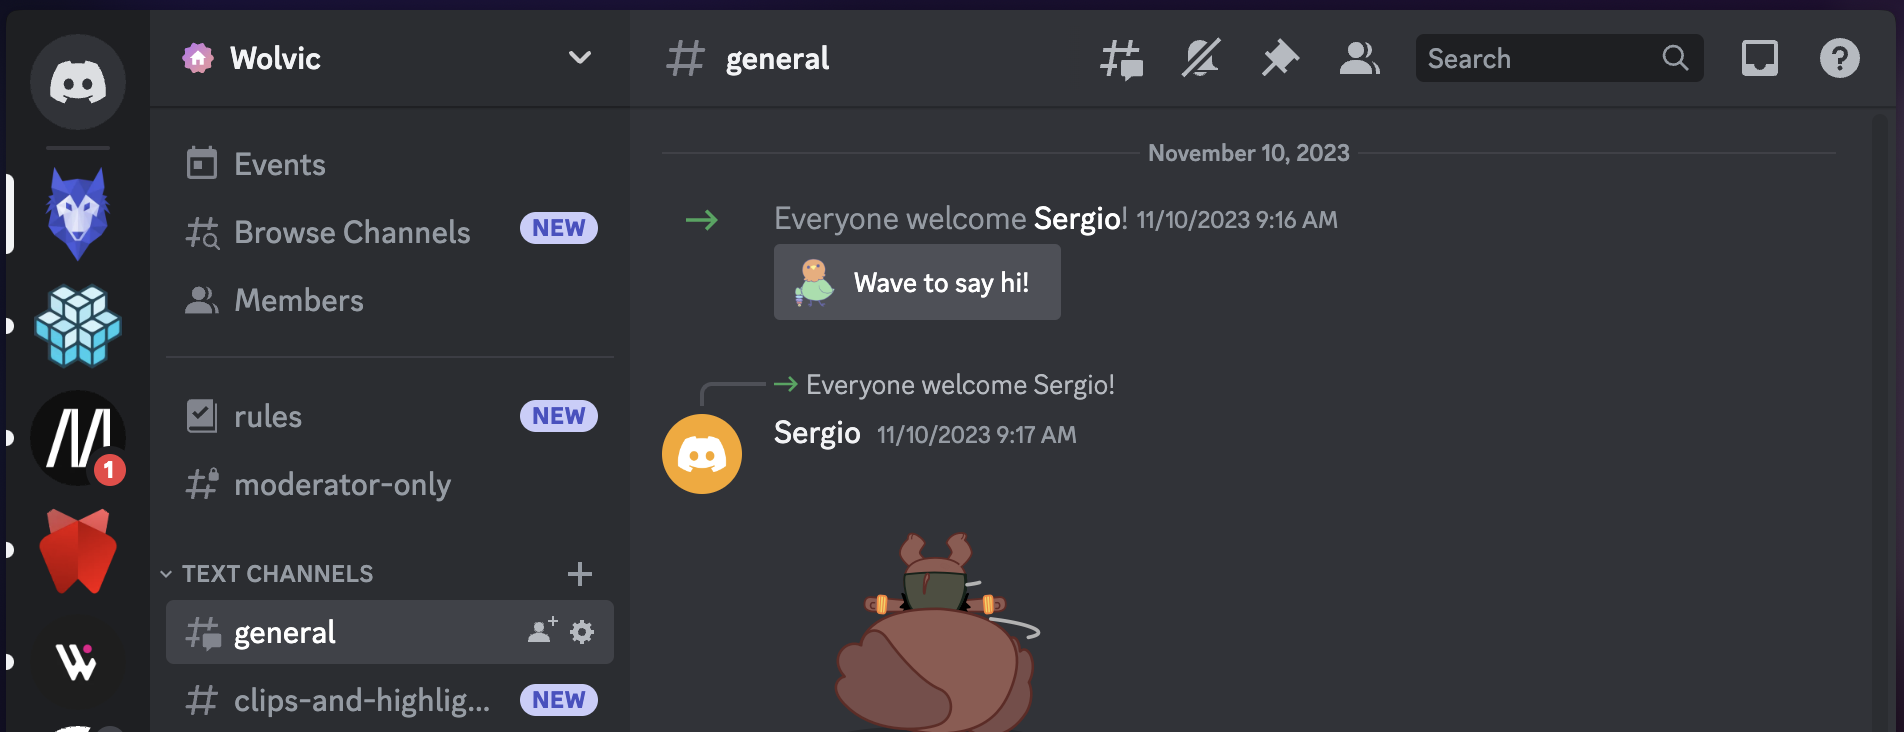 The Wolvic Discord